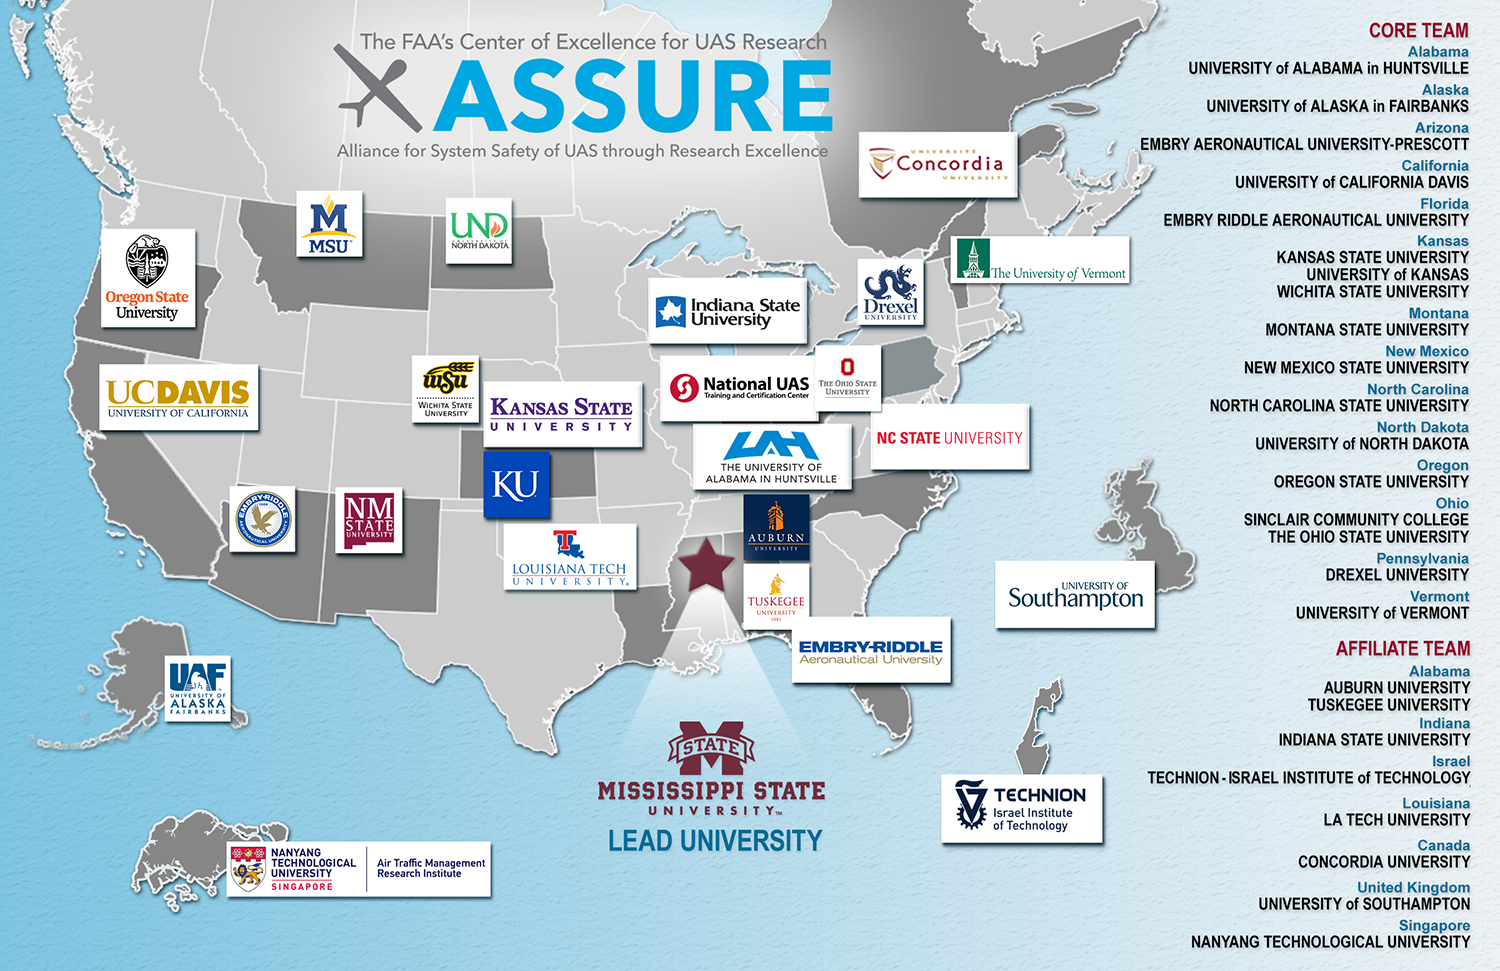 Map of the Alliance for System Safety of UAS through Research Excellence